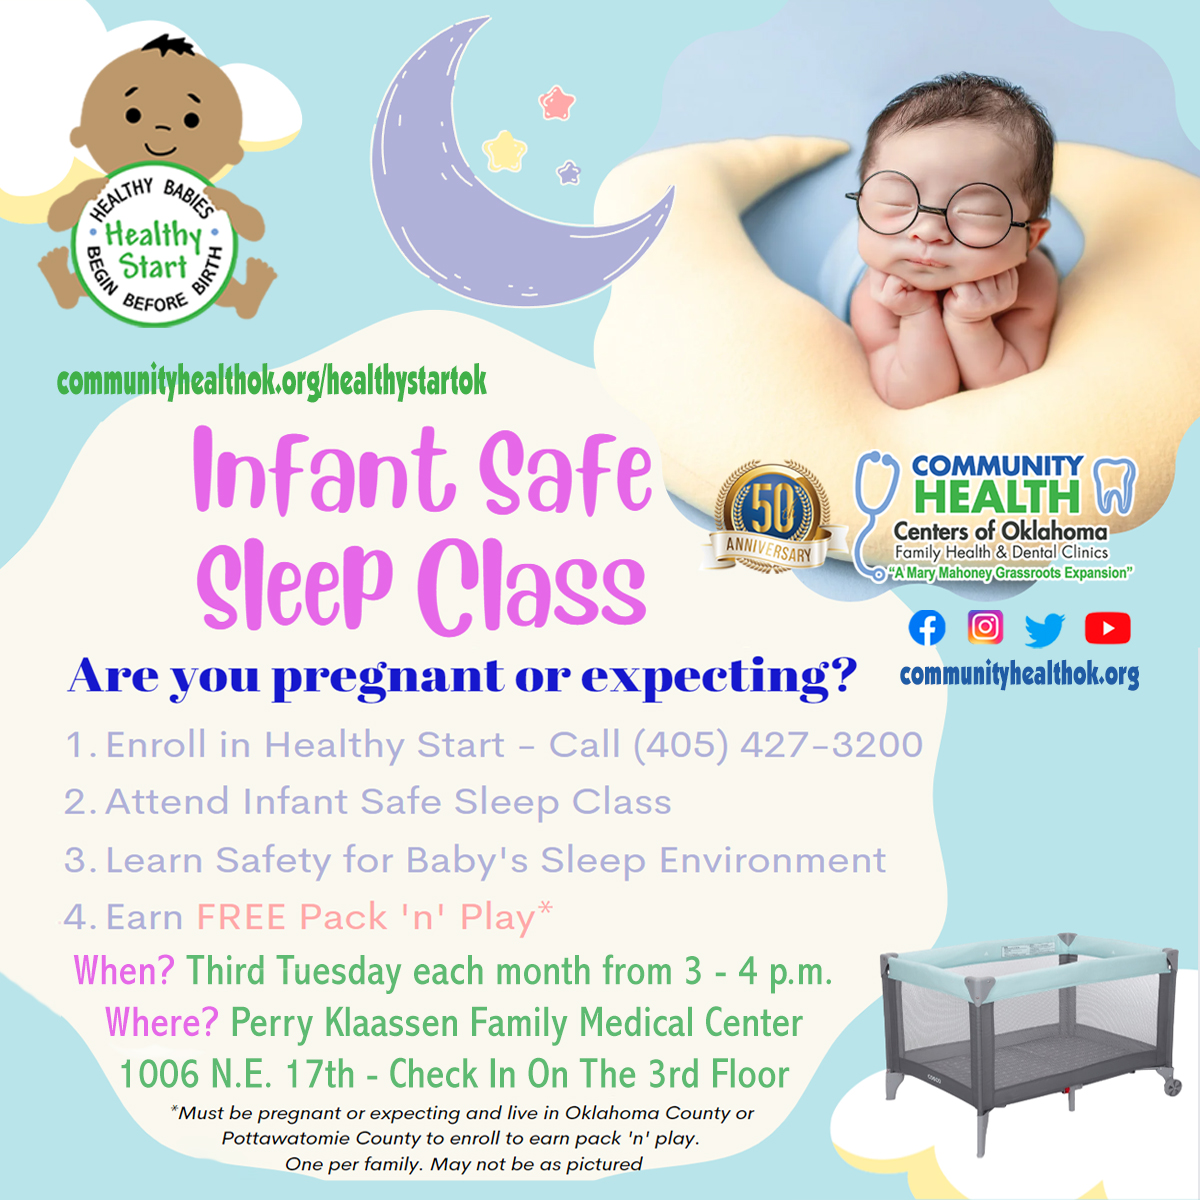 INFANT SAFE SLEEP
July 18th - 3 - 4 P.M.

FREE PACK 'N' PLAY for expecting parents when you enroll and attend a class Call 405.427.3200
Learn safe sleep principles for newborns and infants.

#safesleep #healthystart #babysleep